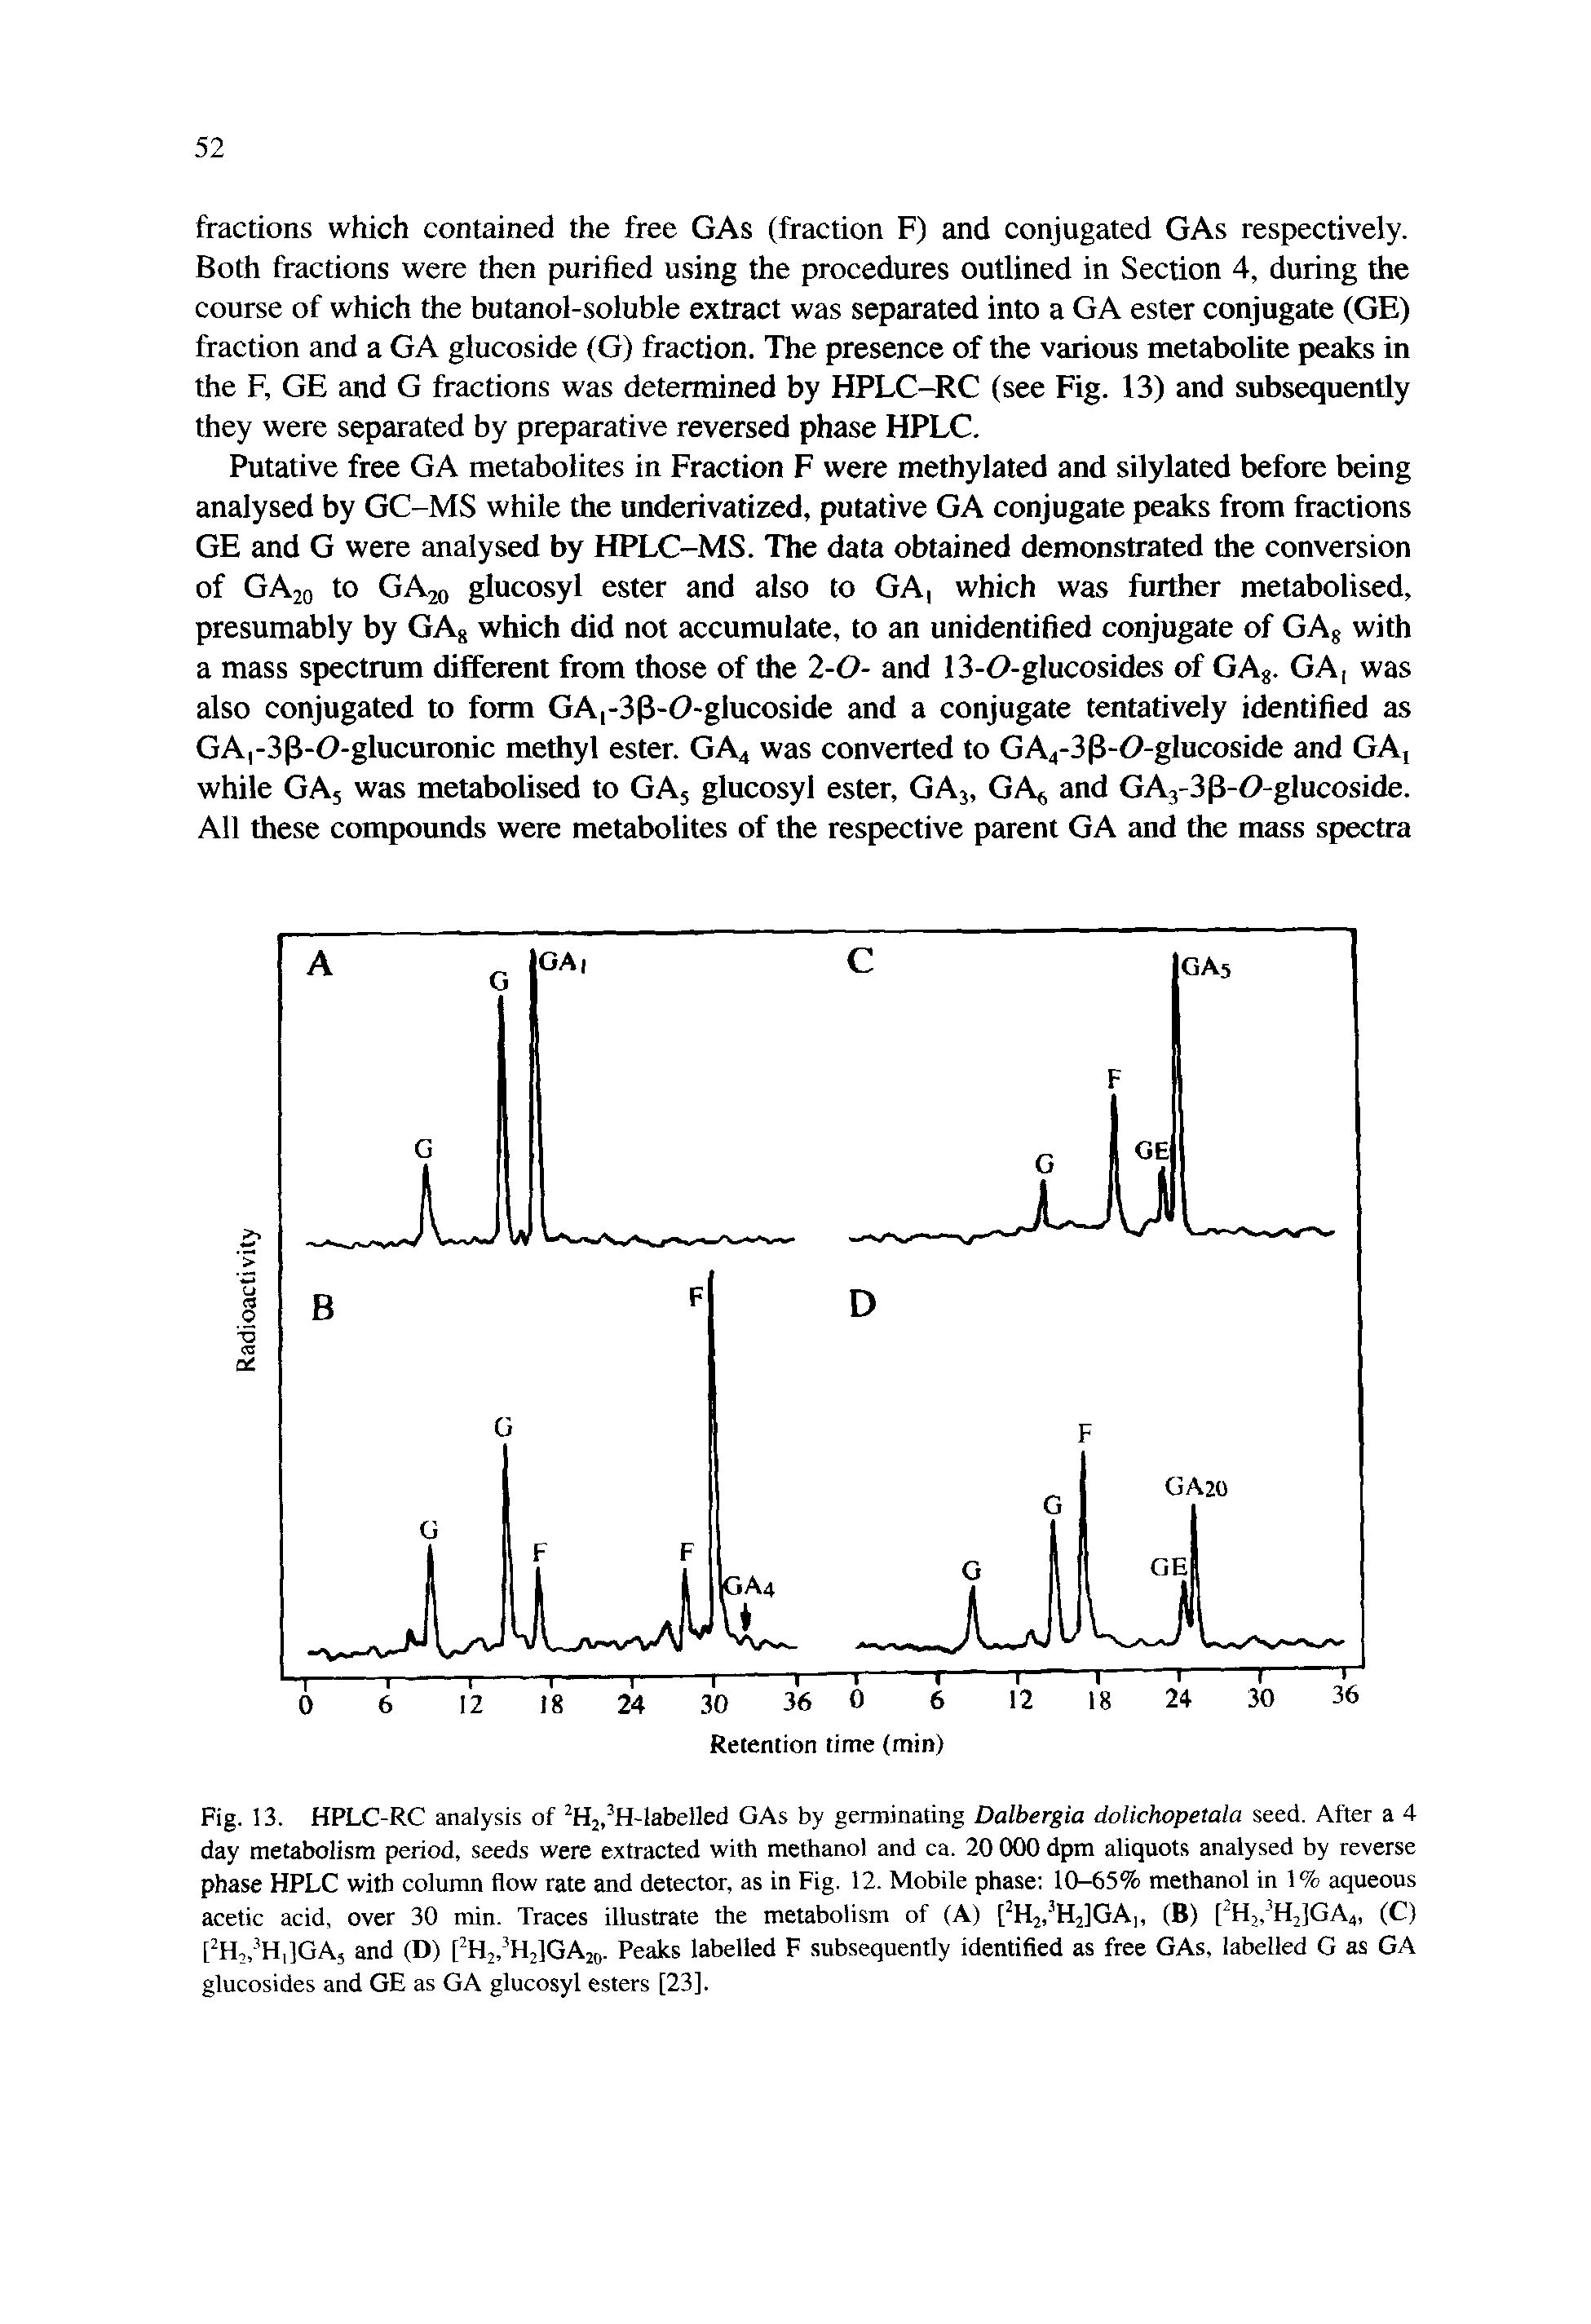 Fig. 13. HPLC-RC analysis of Hj. H-labelled GAs by germinating Dalbergia dolichopetala seed. After a 4 day metabolism period, seeds were extracted with methanol and ca. 20 000 dpm aliquots analysed by reverse phase HPLC with column flow rate and detector, as in Fig. 12. Mobile phase 10-65% methanol in 1% aqueous acetic acid, over 30 min. Traces illustrate the metabolism of (A) [ H2, H2]GA, (B) [ H, H2]GA4, (C) [ Hj. HiiGA, and (D) [ H2, H2]GA2o. Peaks labelled F subsequently identified as free GAs, labelled G as GA glucosides and GE as GA glucosyl esters [23].